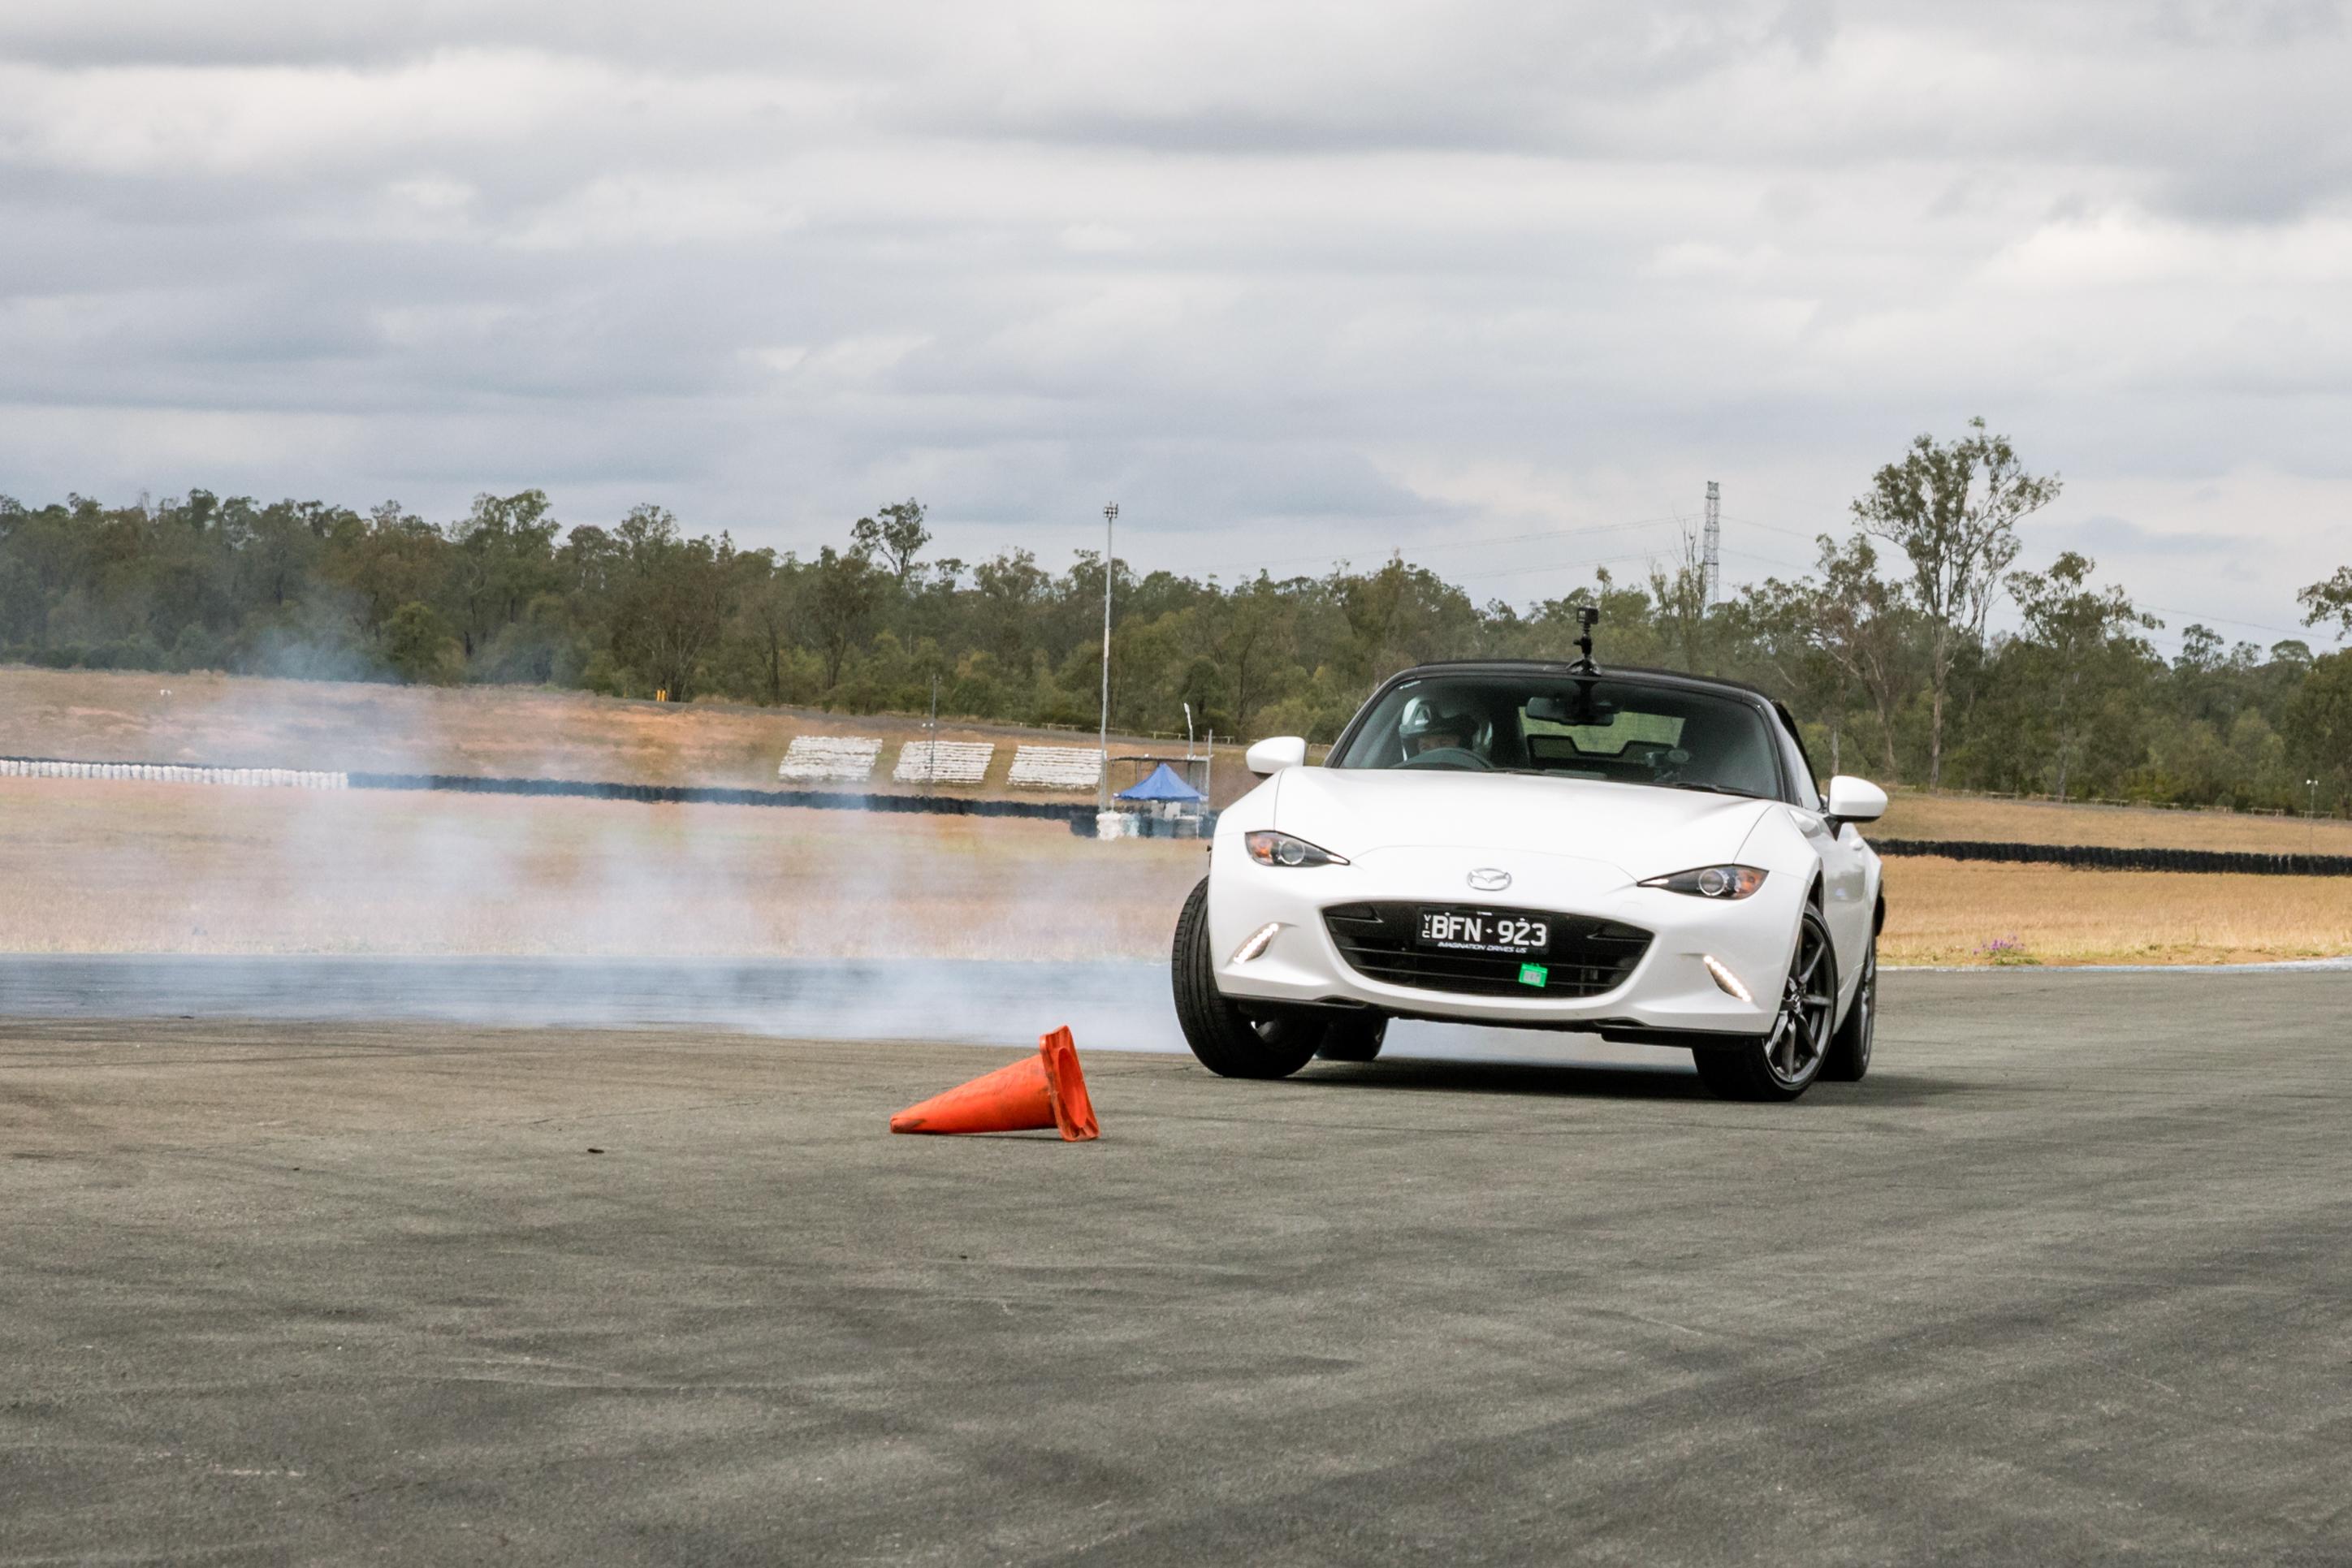 2021 Mazda MX-5 Review and Video